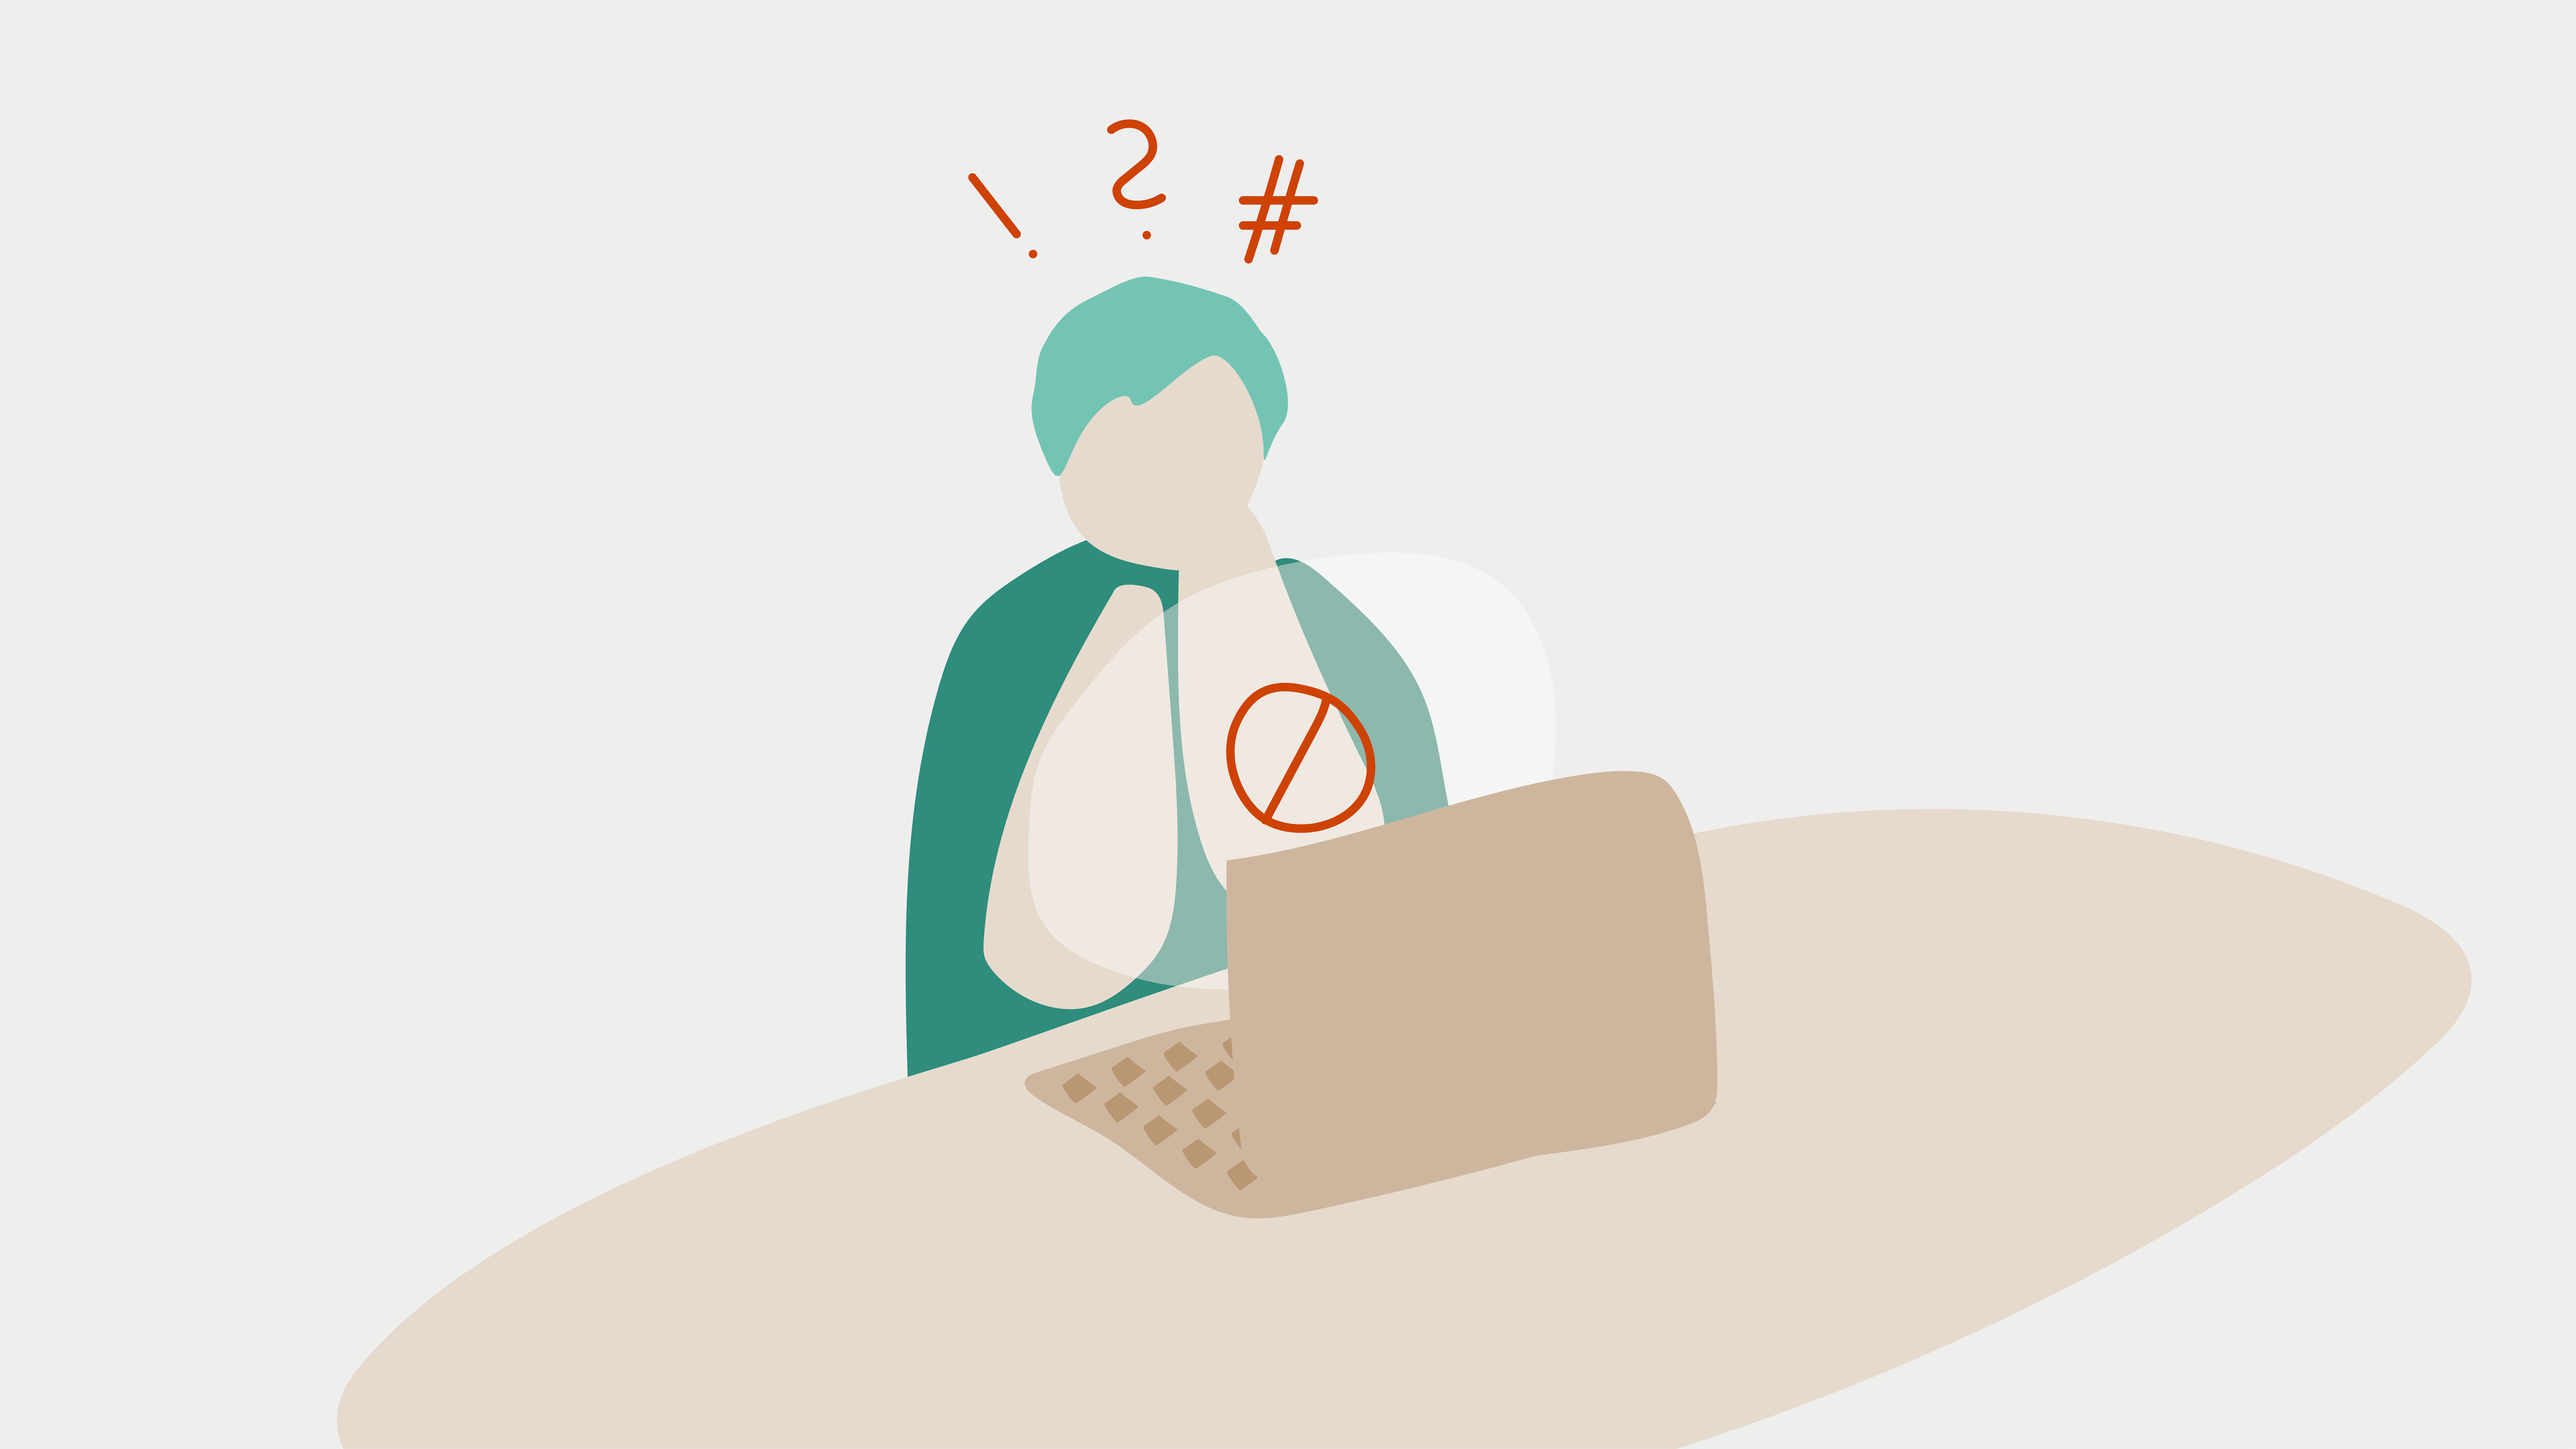 Illustration of a person behind a laptop, being unable to use it.